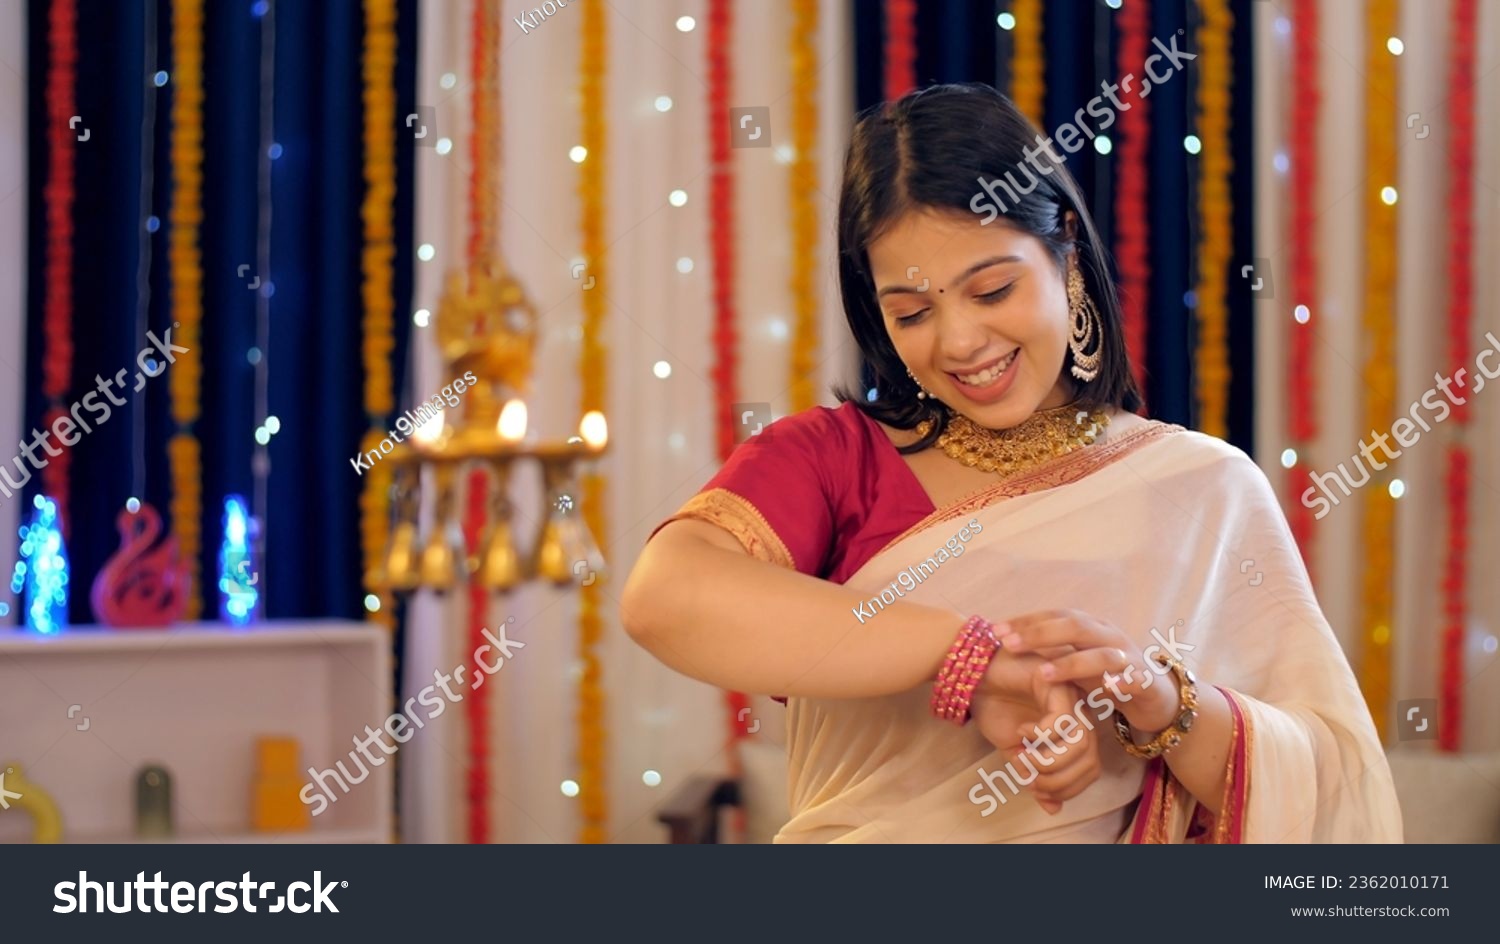 A beautiful Indian woman in an ethnic dress checking her new bangles - woman's accessories, festival celebration. A young woman wearing jewellery and a saree for Diwali festival - traditional dress... #2362010171